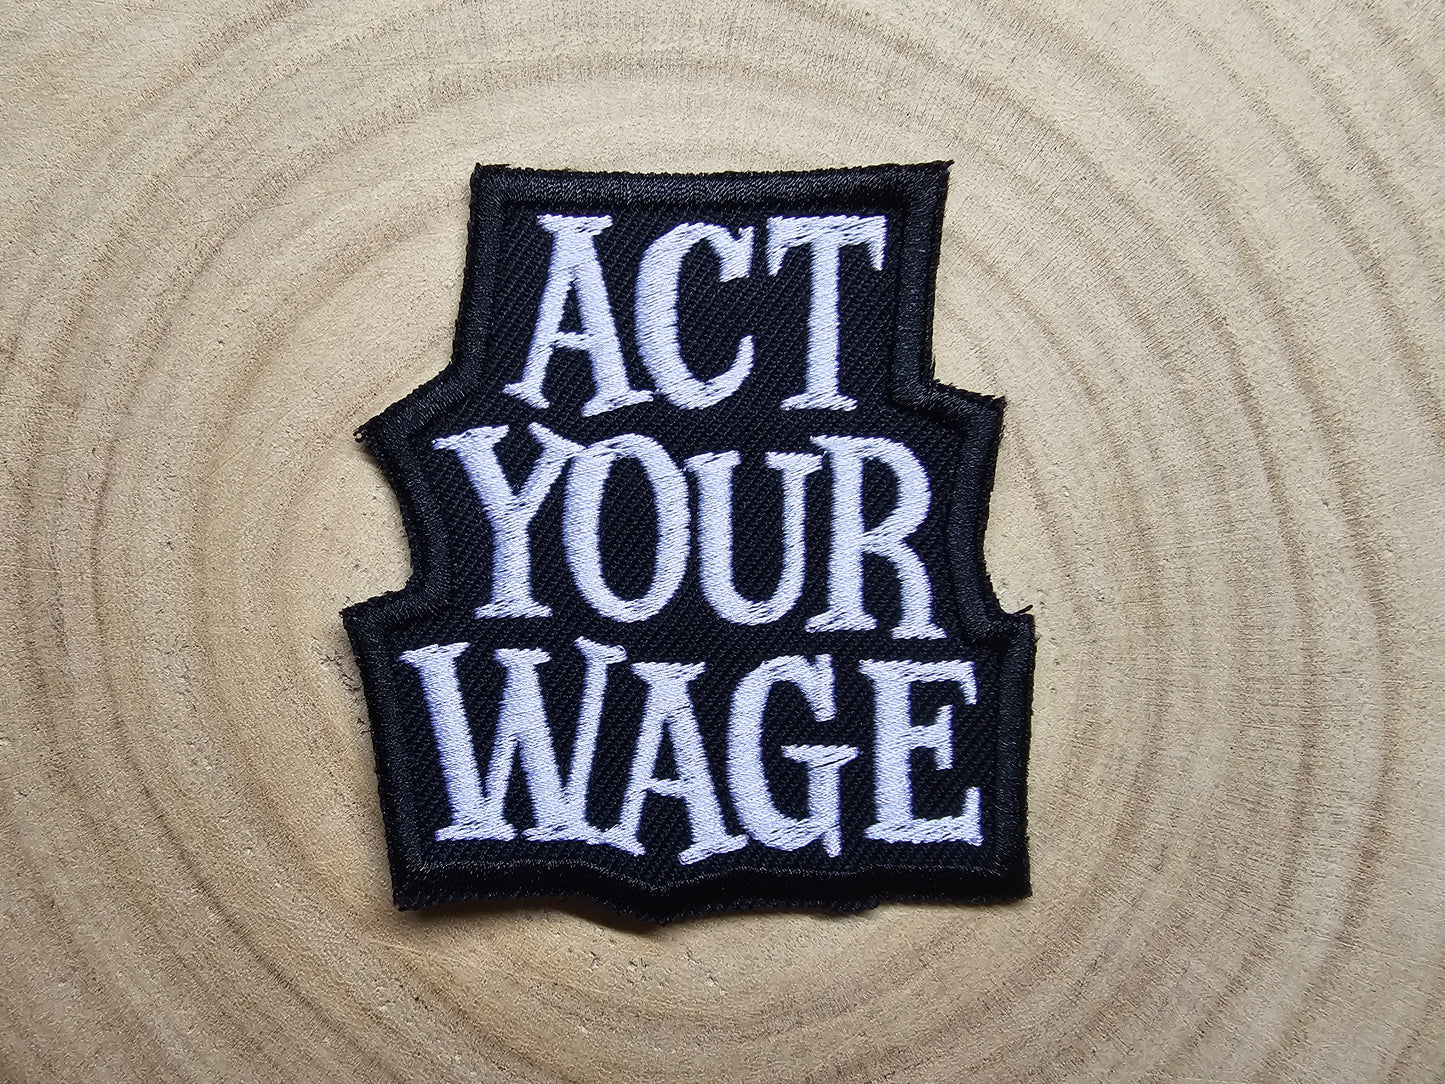 Act Your Wage Funny Pro Strike and Unions Embroidered Iron On Patch Politics Punk